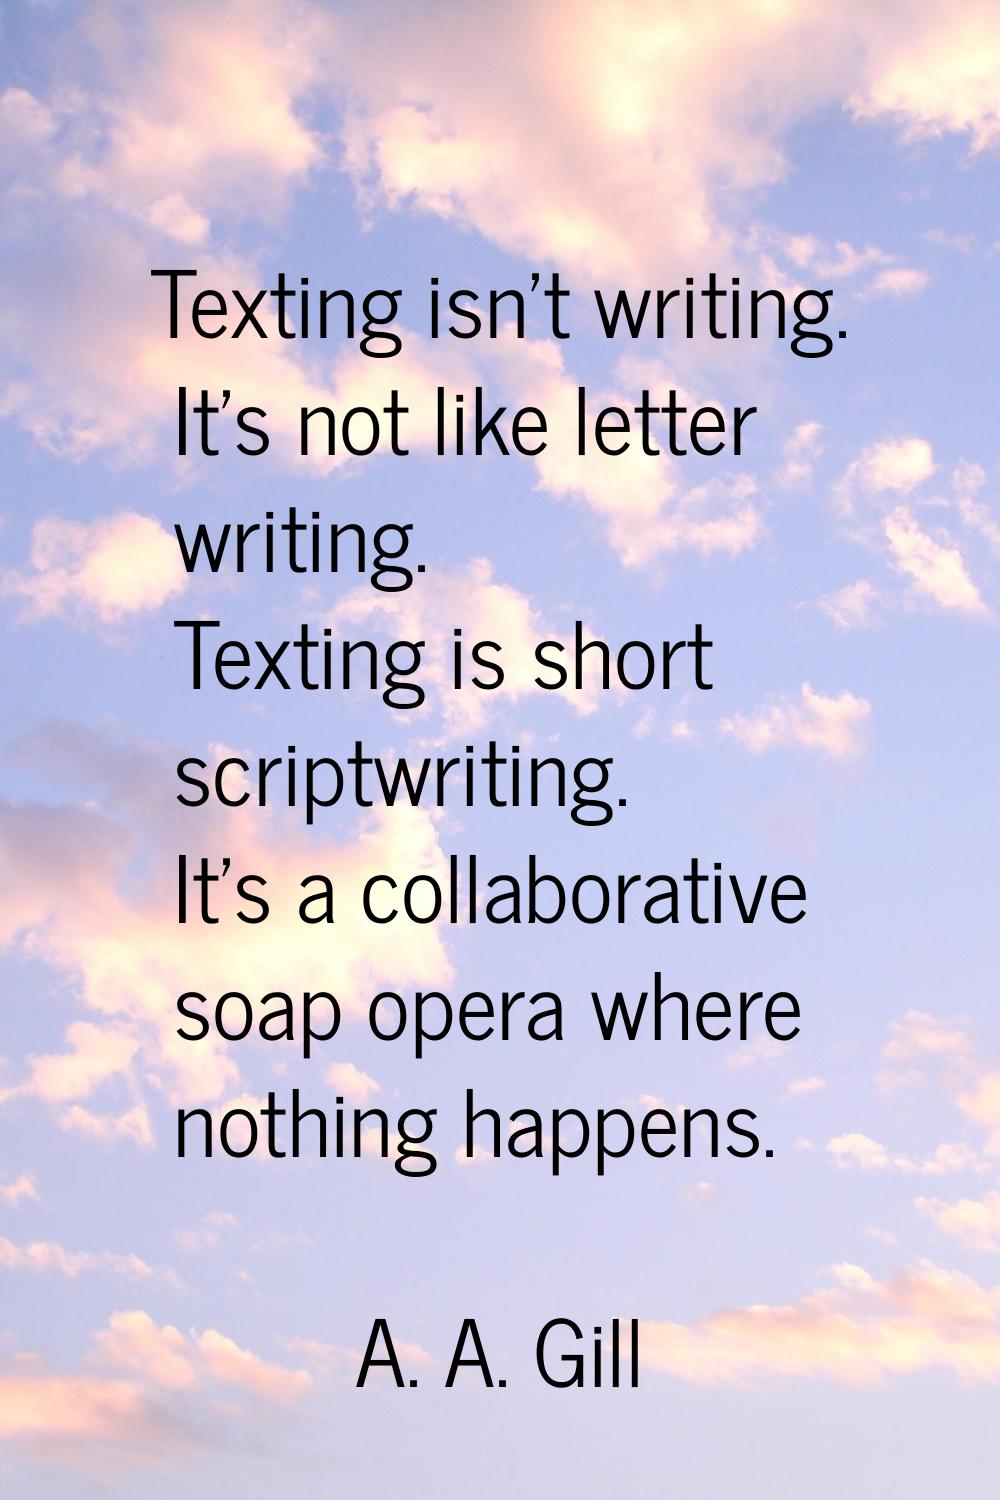 Texting isn't writing. It's not like letter writing. Texting is short scriptwriting. It's a collabo